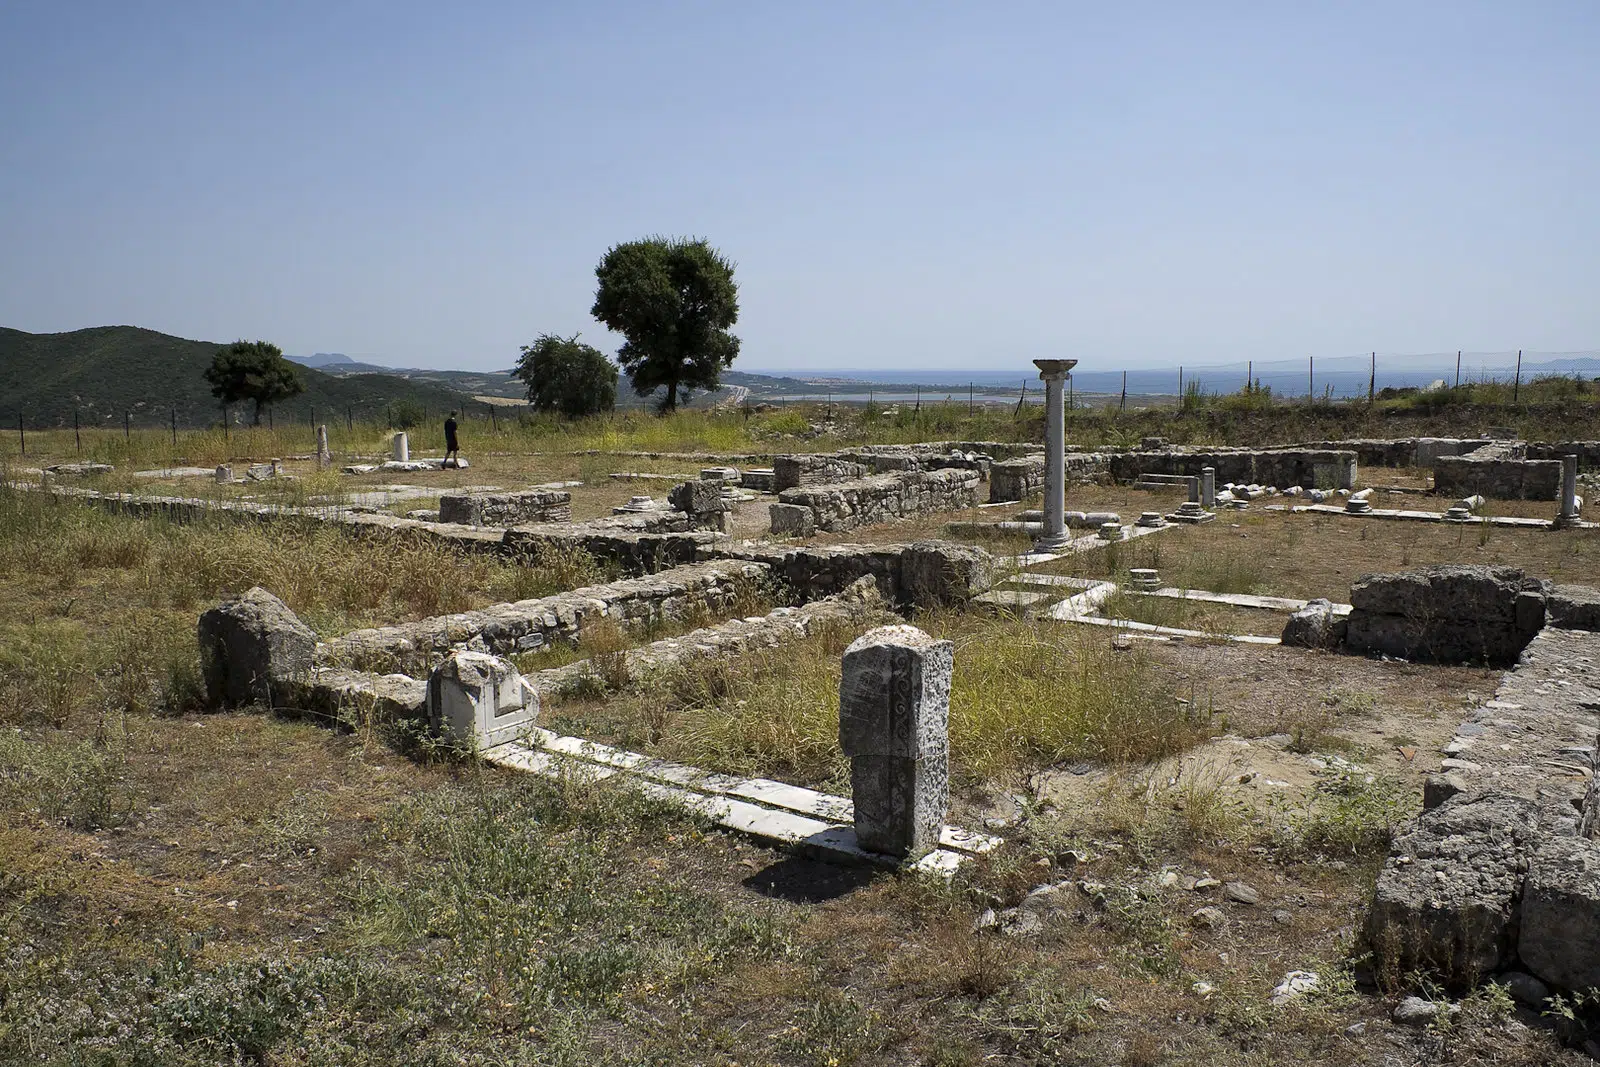 Ruins at the ancient city of Amphipolis, where further new discoveries have been made. Credit Marmontel.